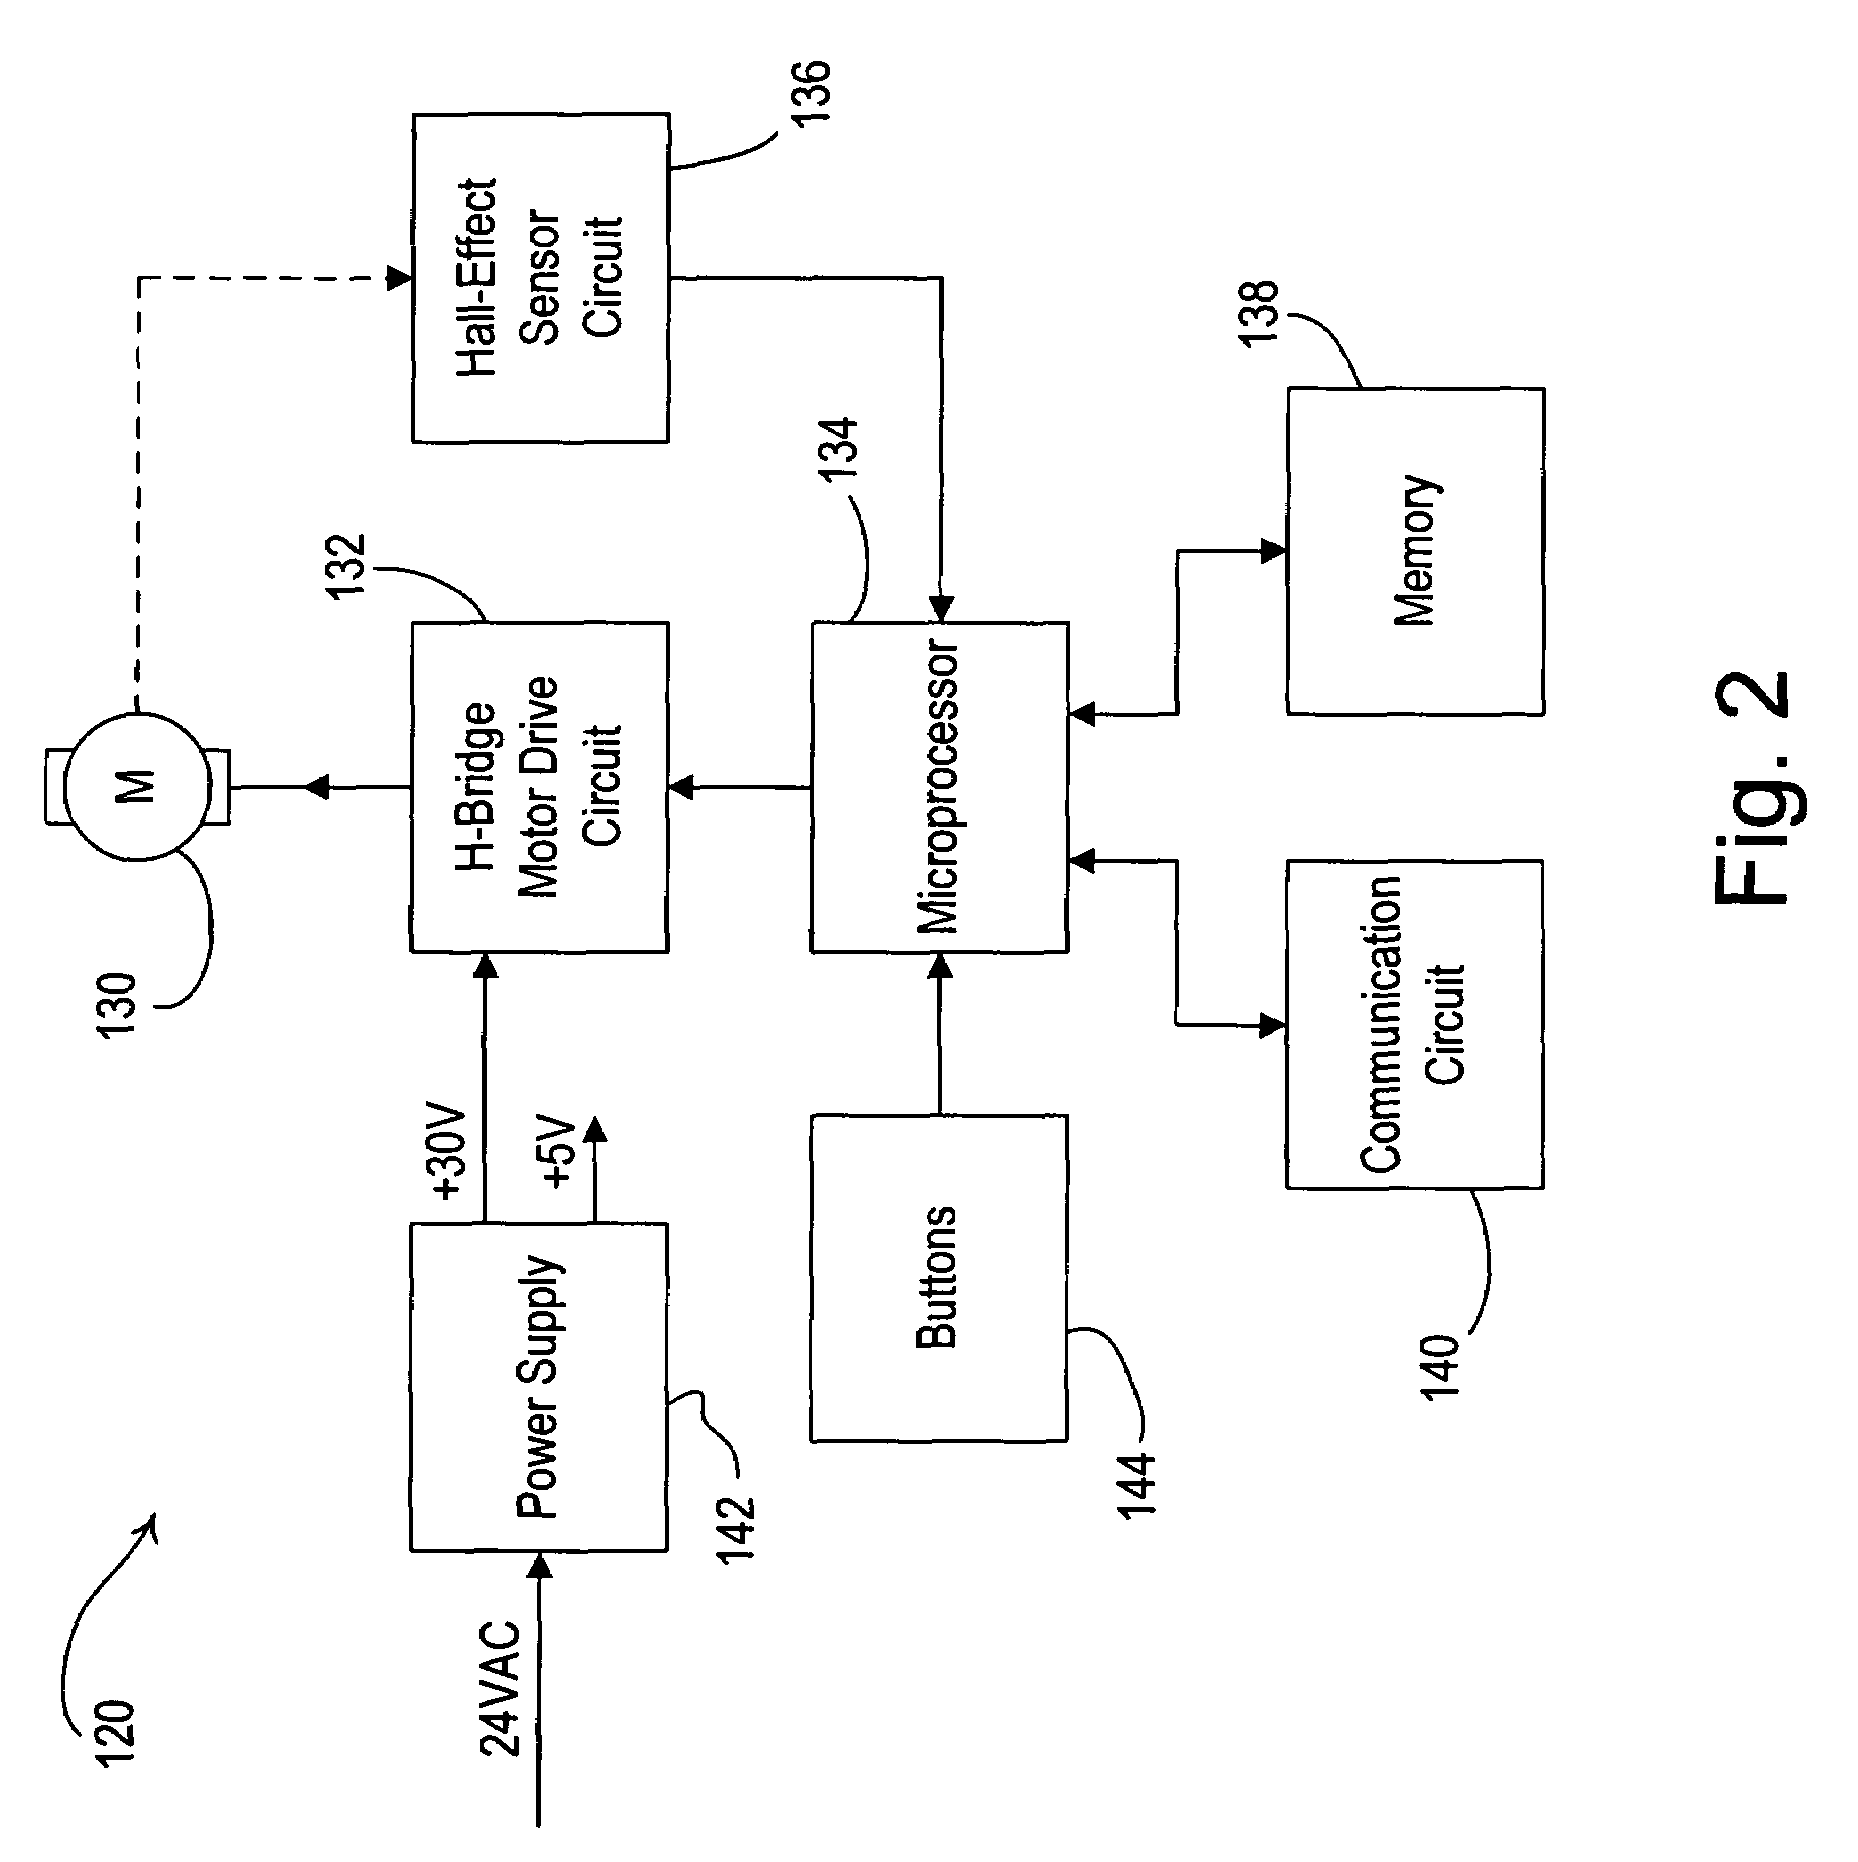 Method of calibrating a motorized roller shade